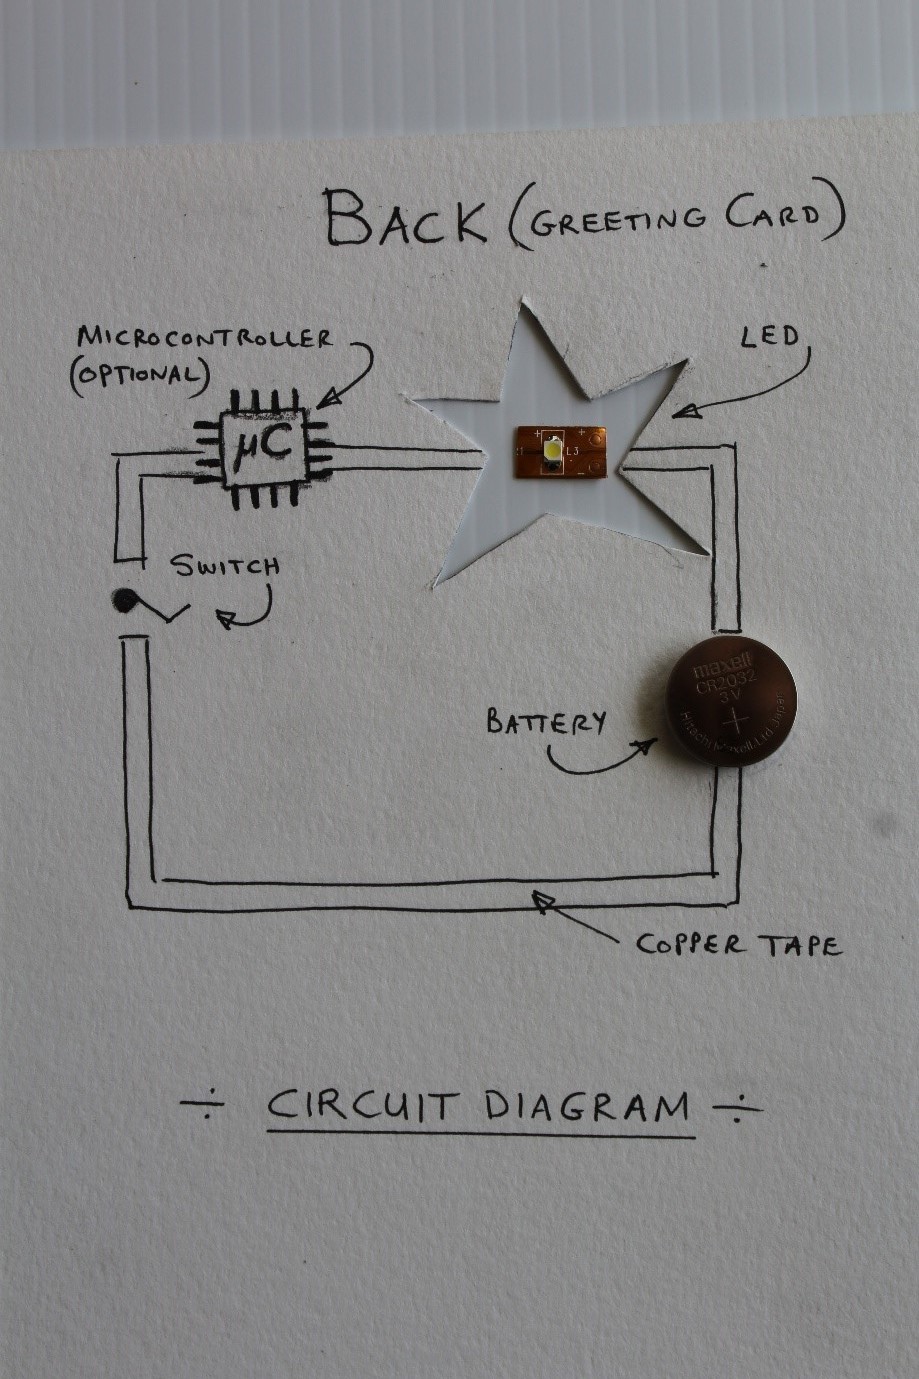 IMAGE: Typical planning of the simple circuit on the back of the greeting card. Use a piece of scrap drawing paper make a mock-up card (prototype).